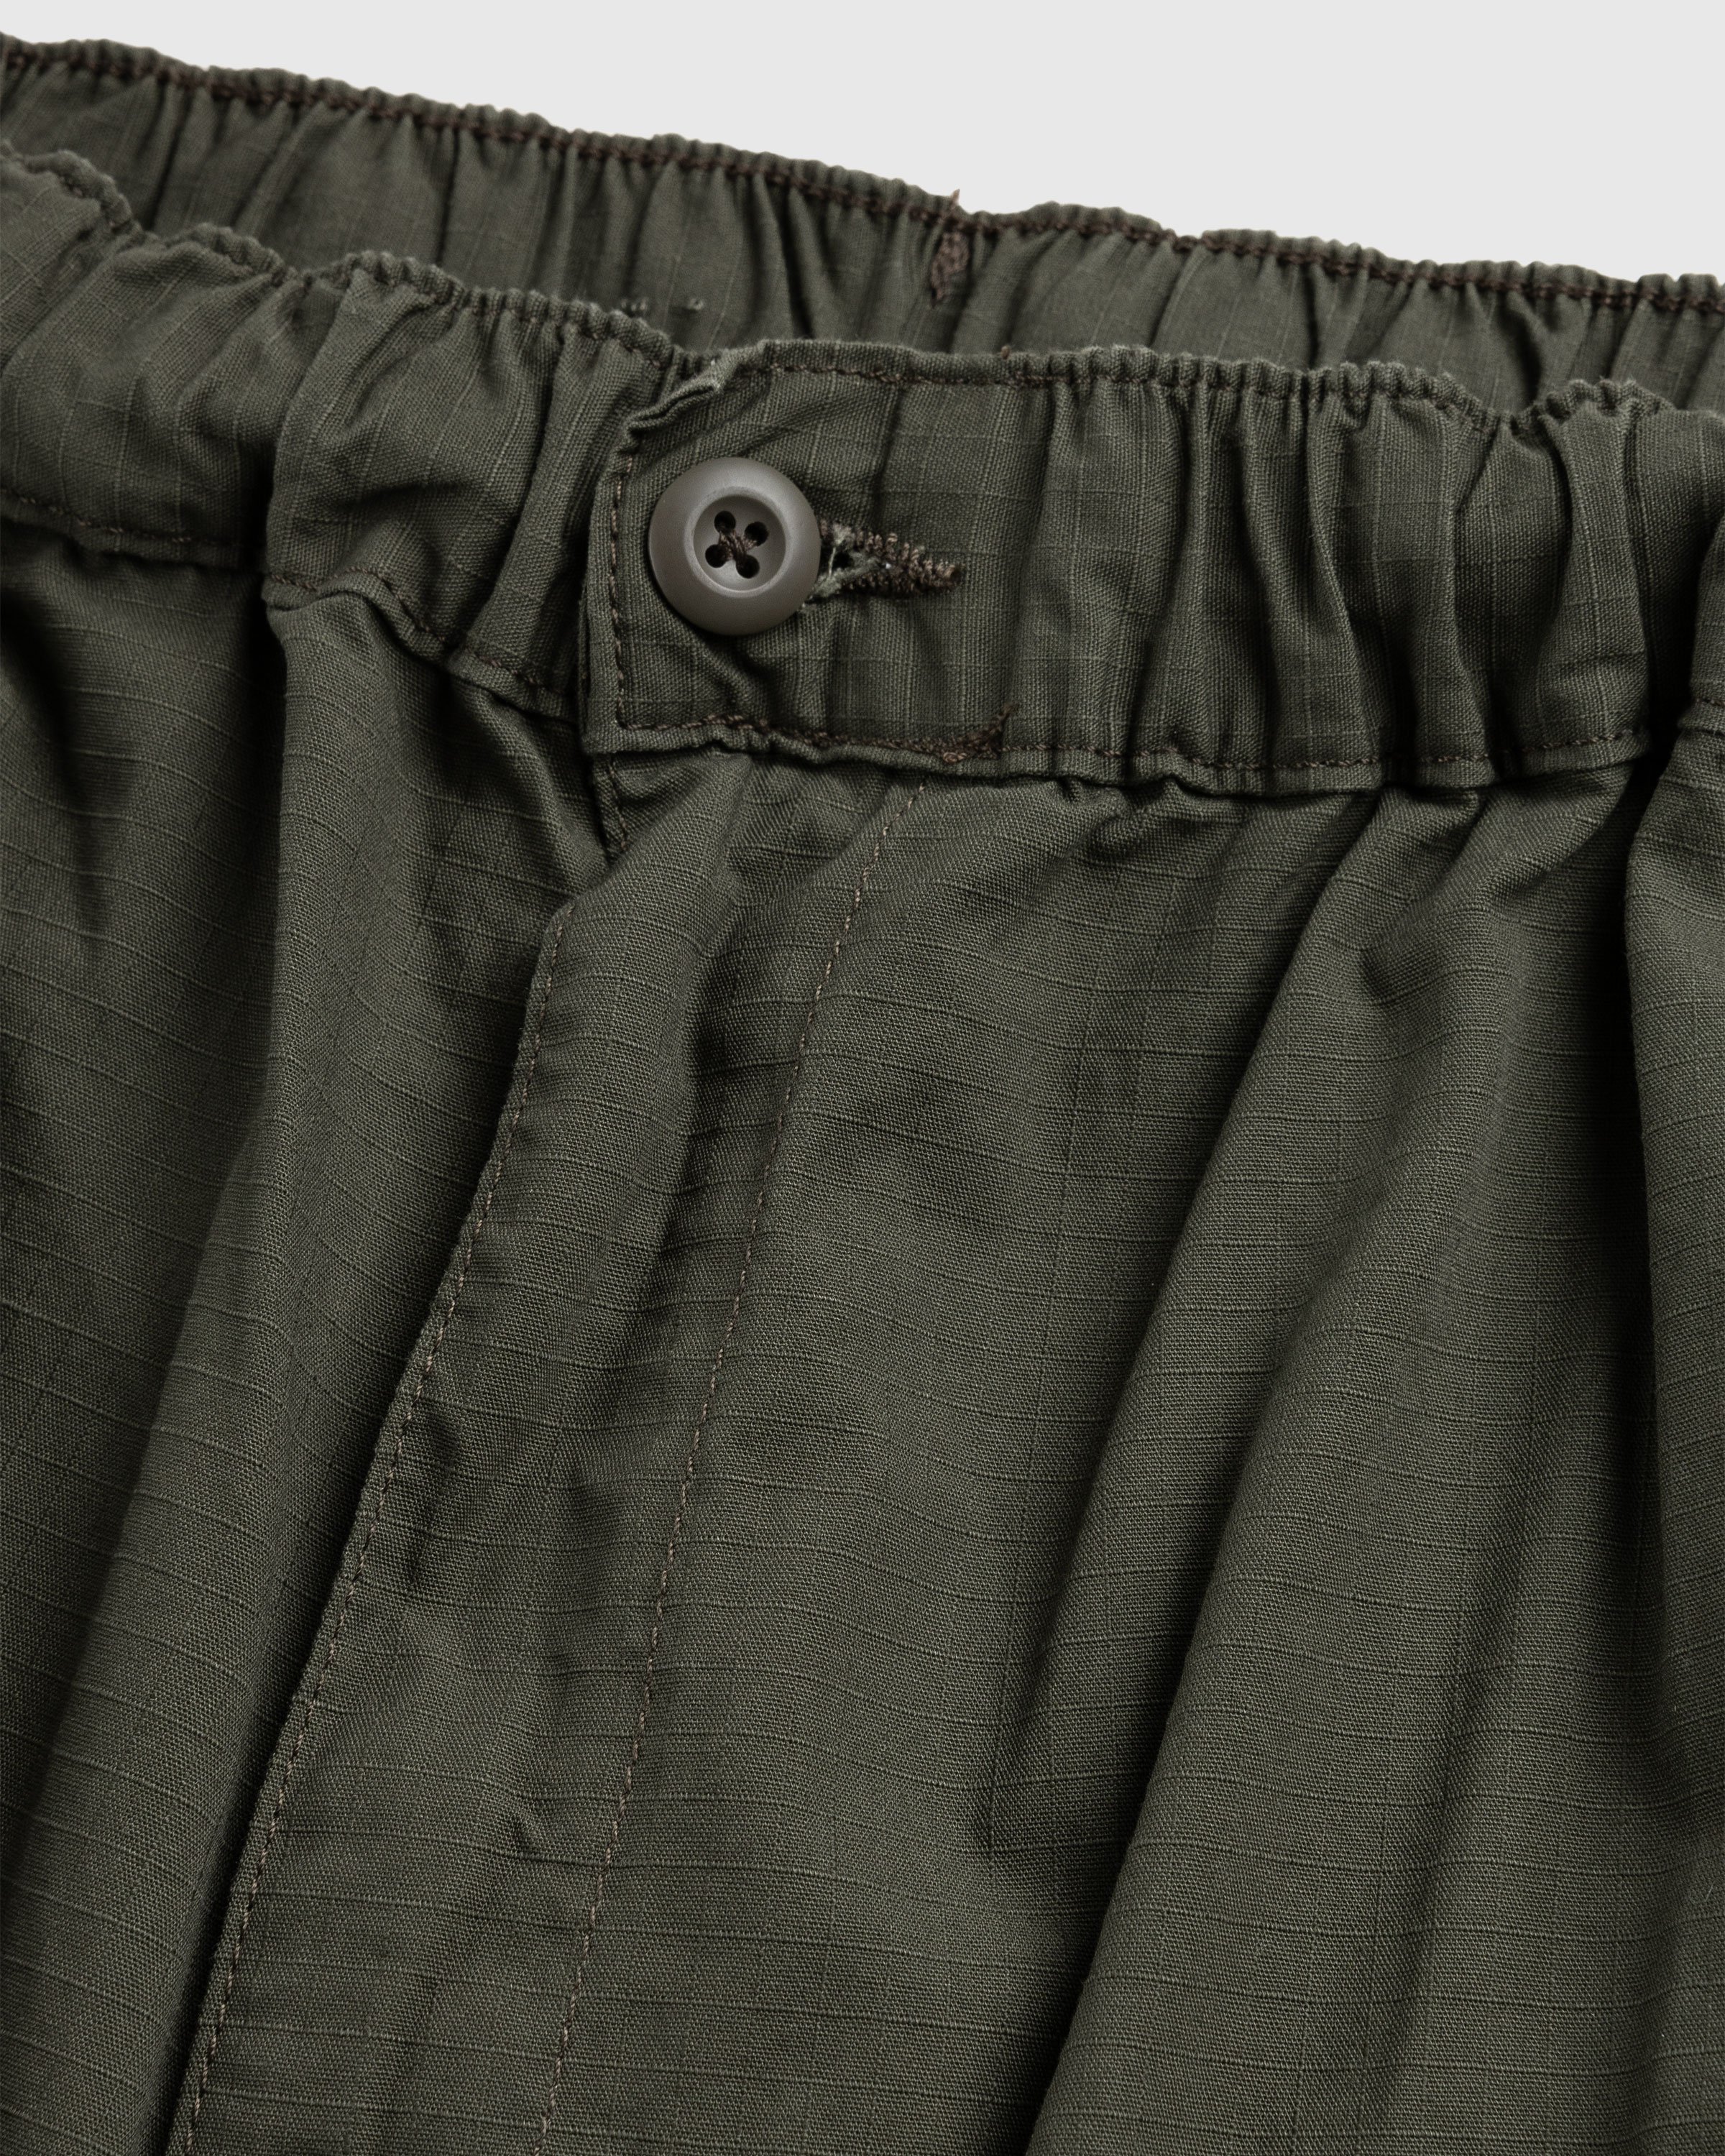 Carhartt WIP - Jet Cargo Pant Cypress/Rinsed - Clothing - Green - Image 7